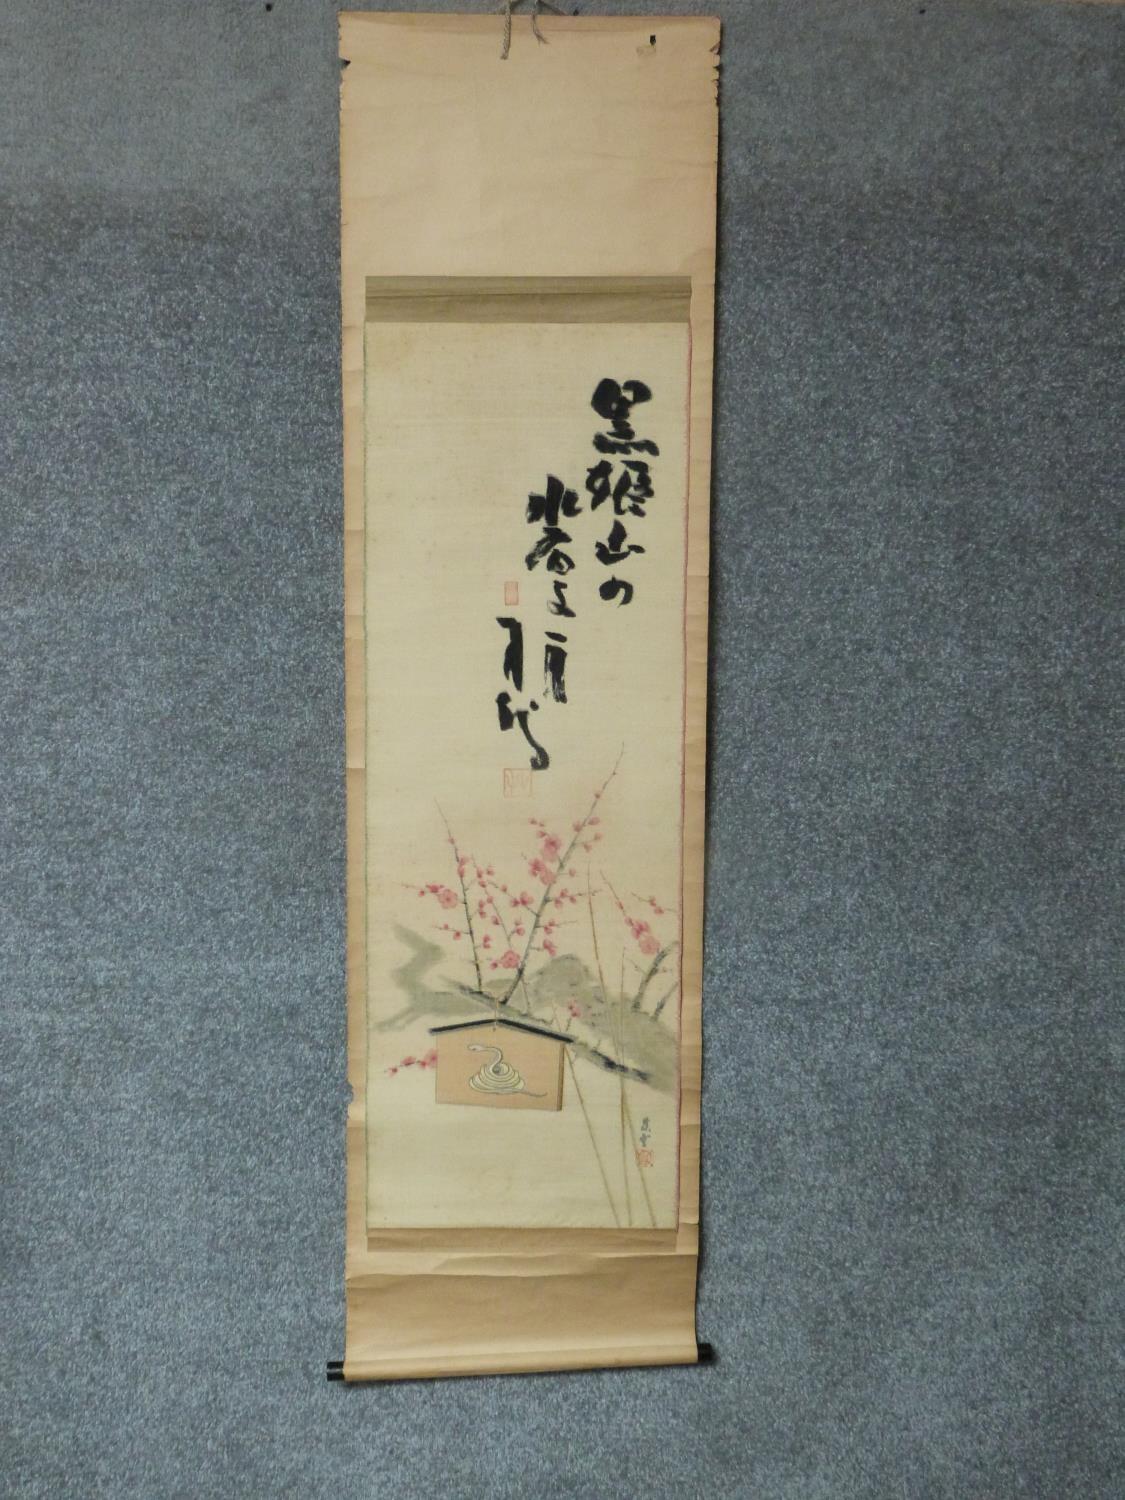 A Japanese mounted scroll, silk painting, coiled snake embroidery and cherry blossom, signed.